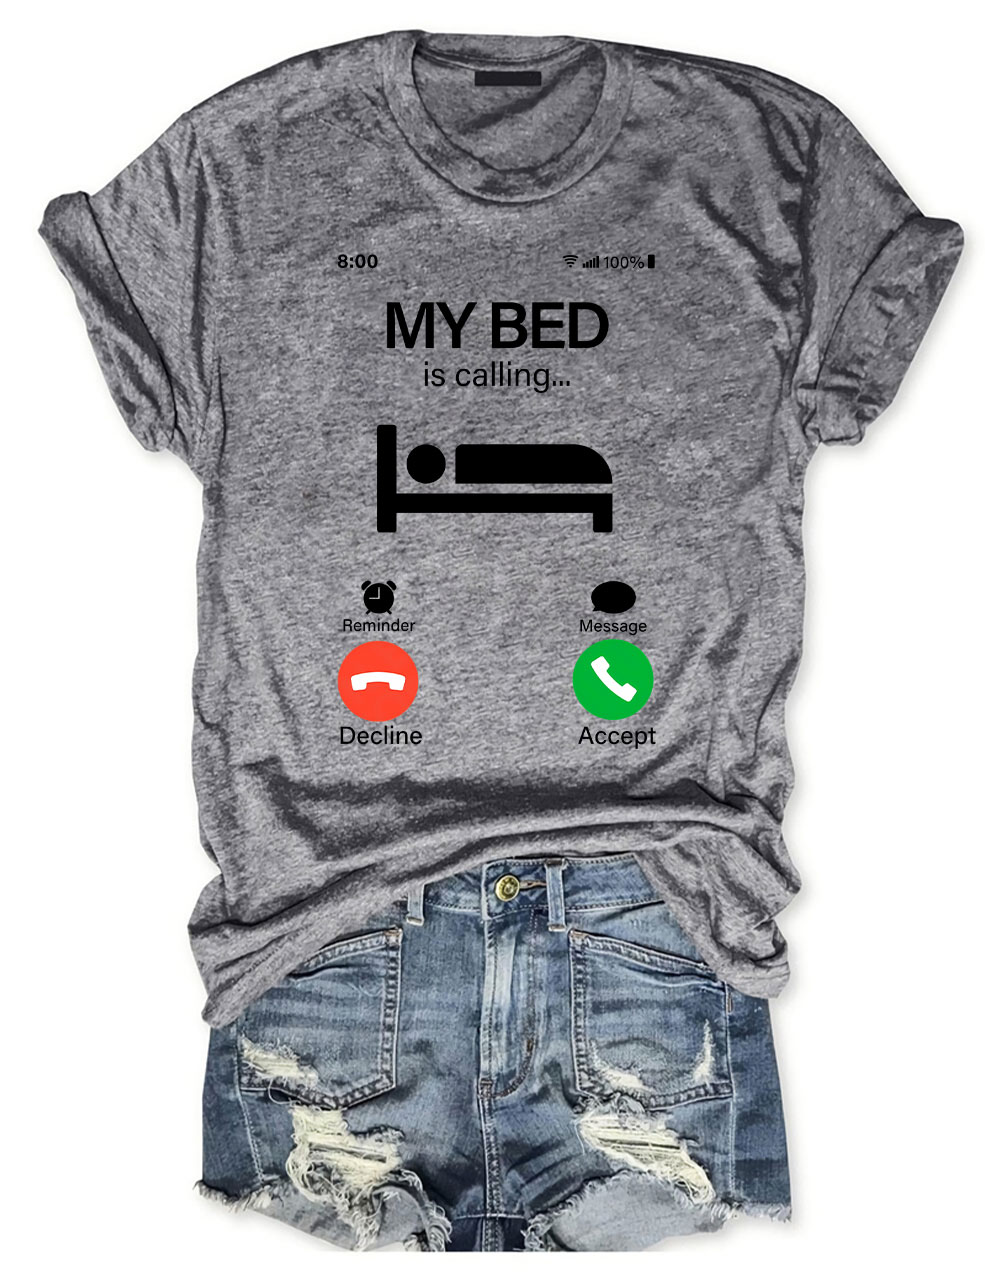 My Bed is Calling T-Shirt